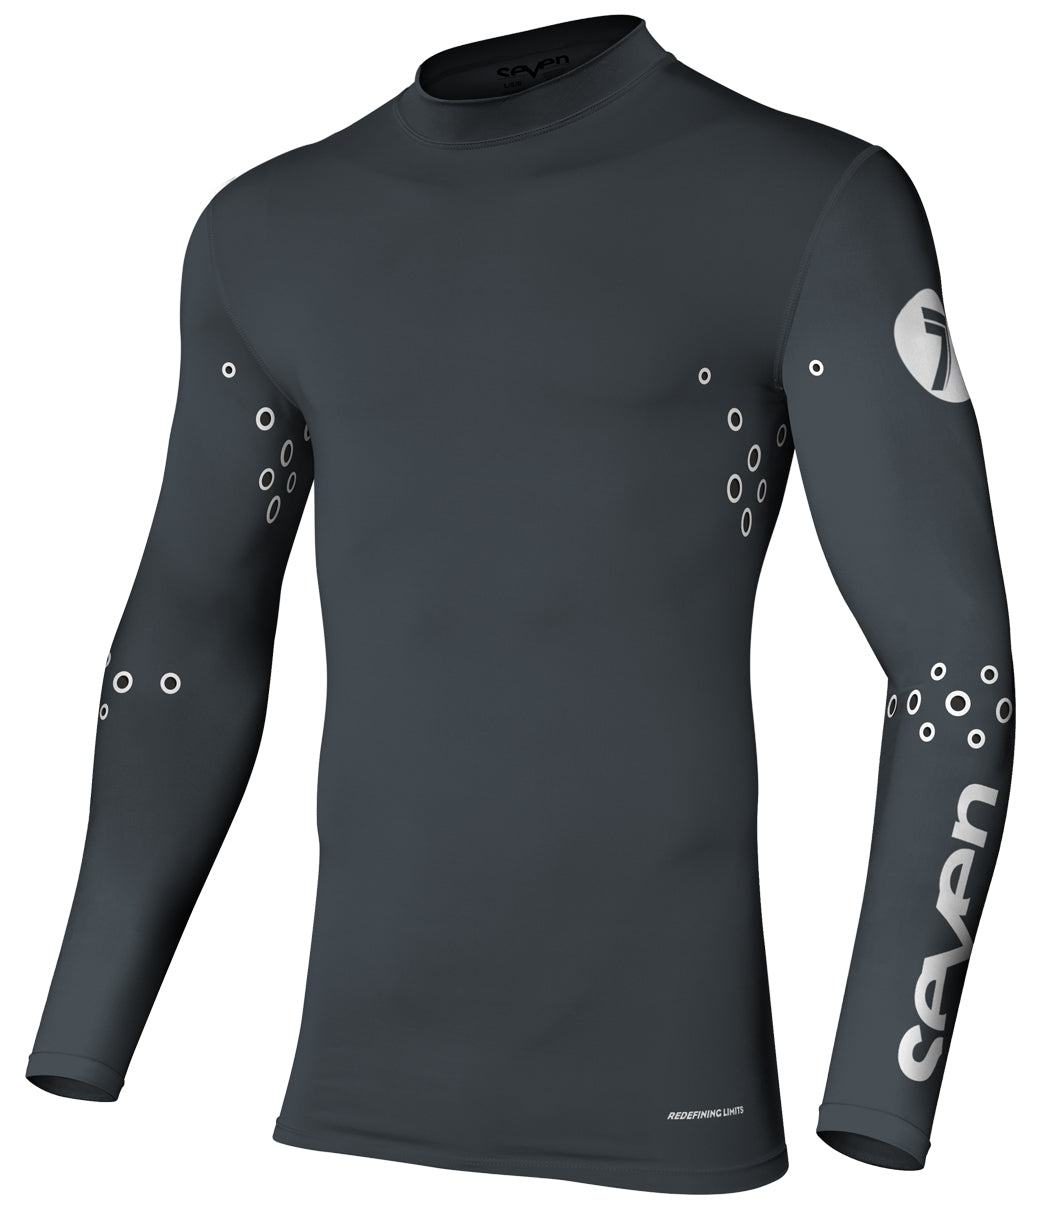 Seven Zero Blade Laser Cut Compression Jersey X-Large Charcoal